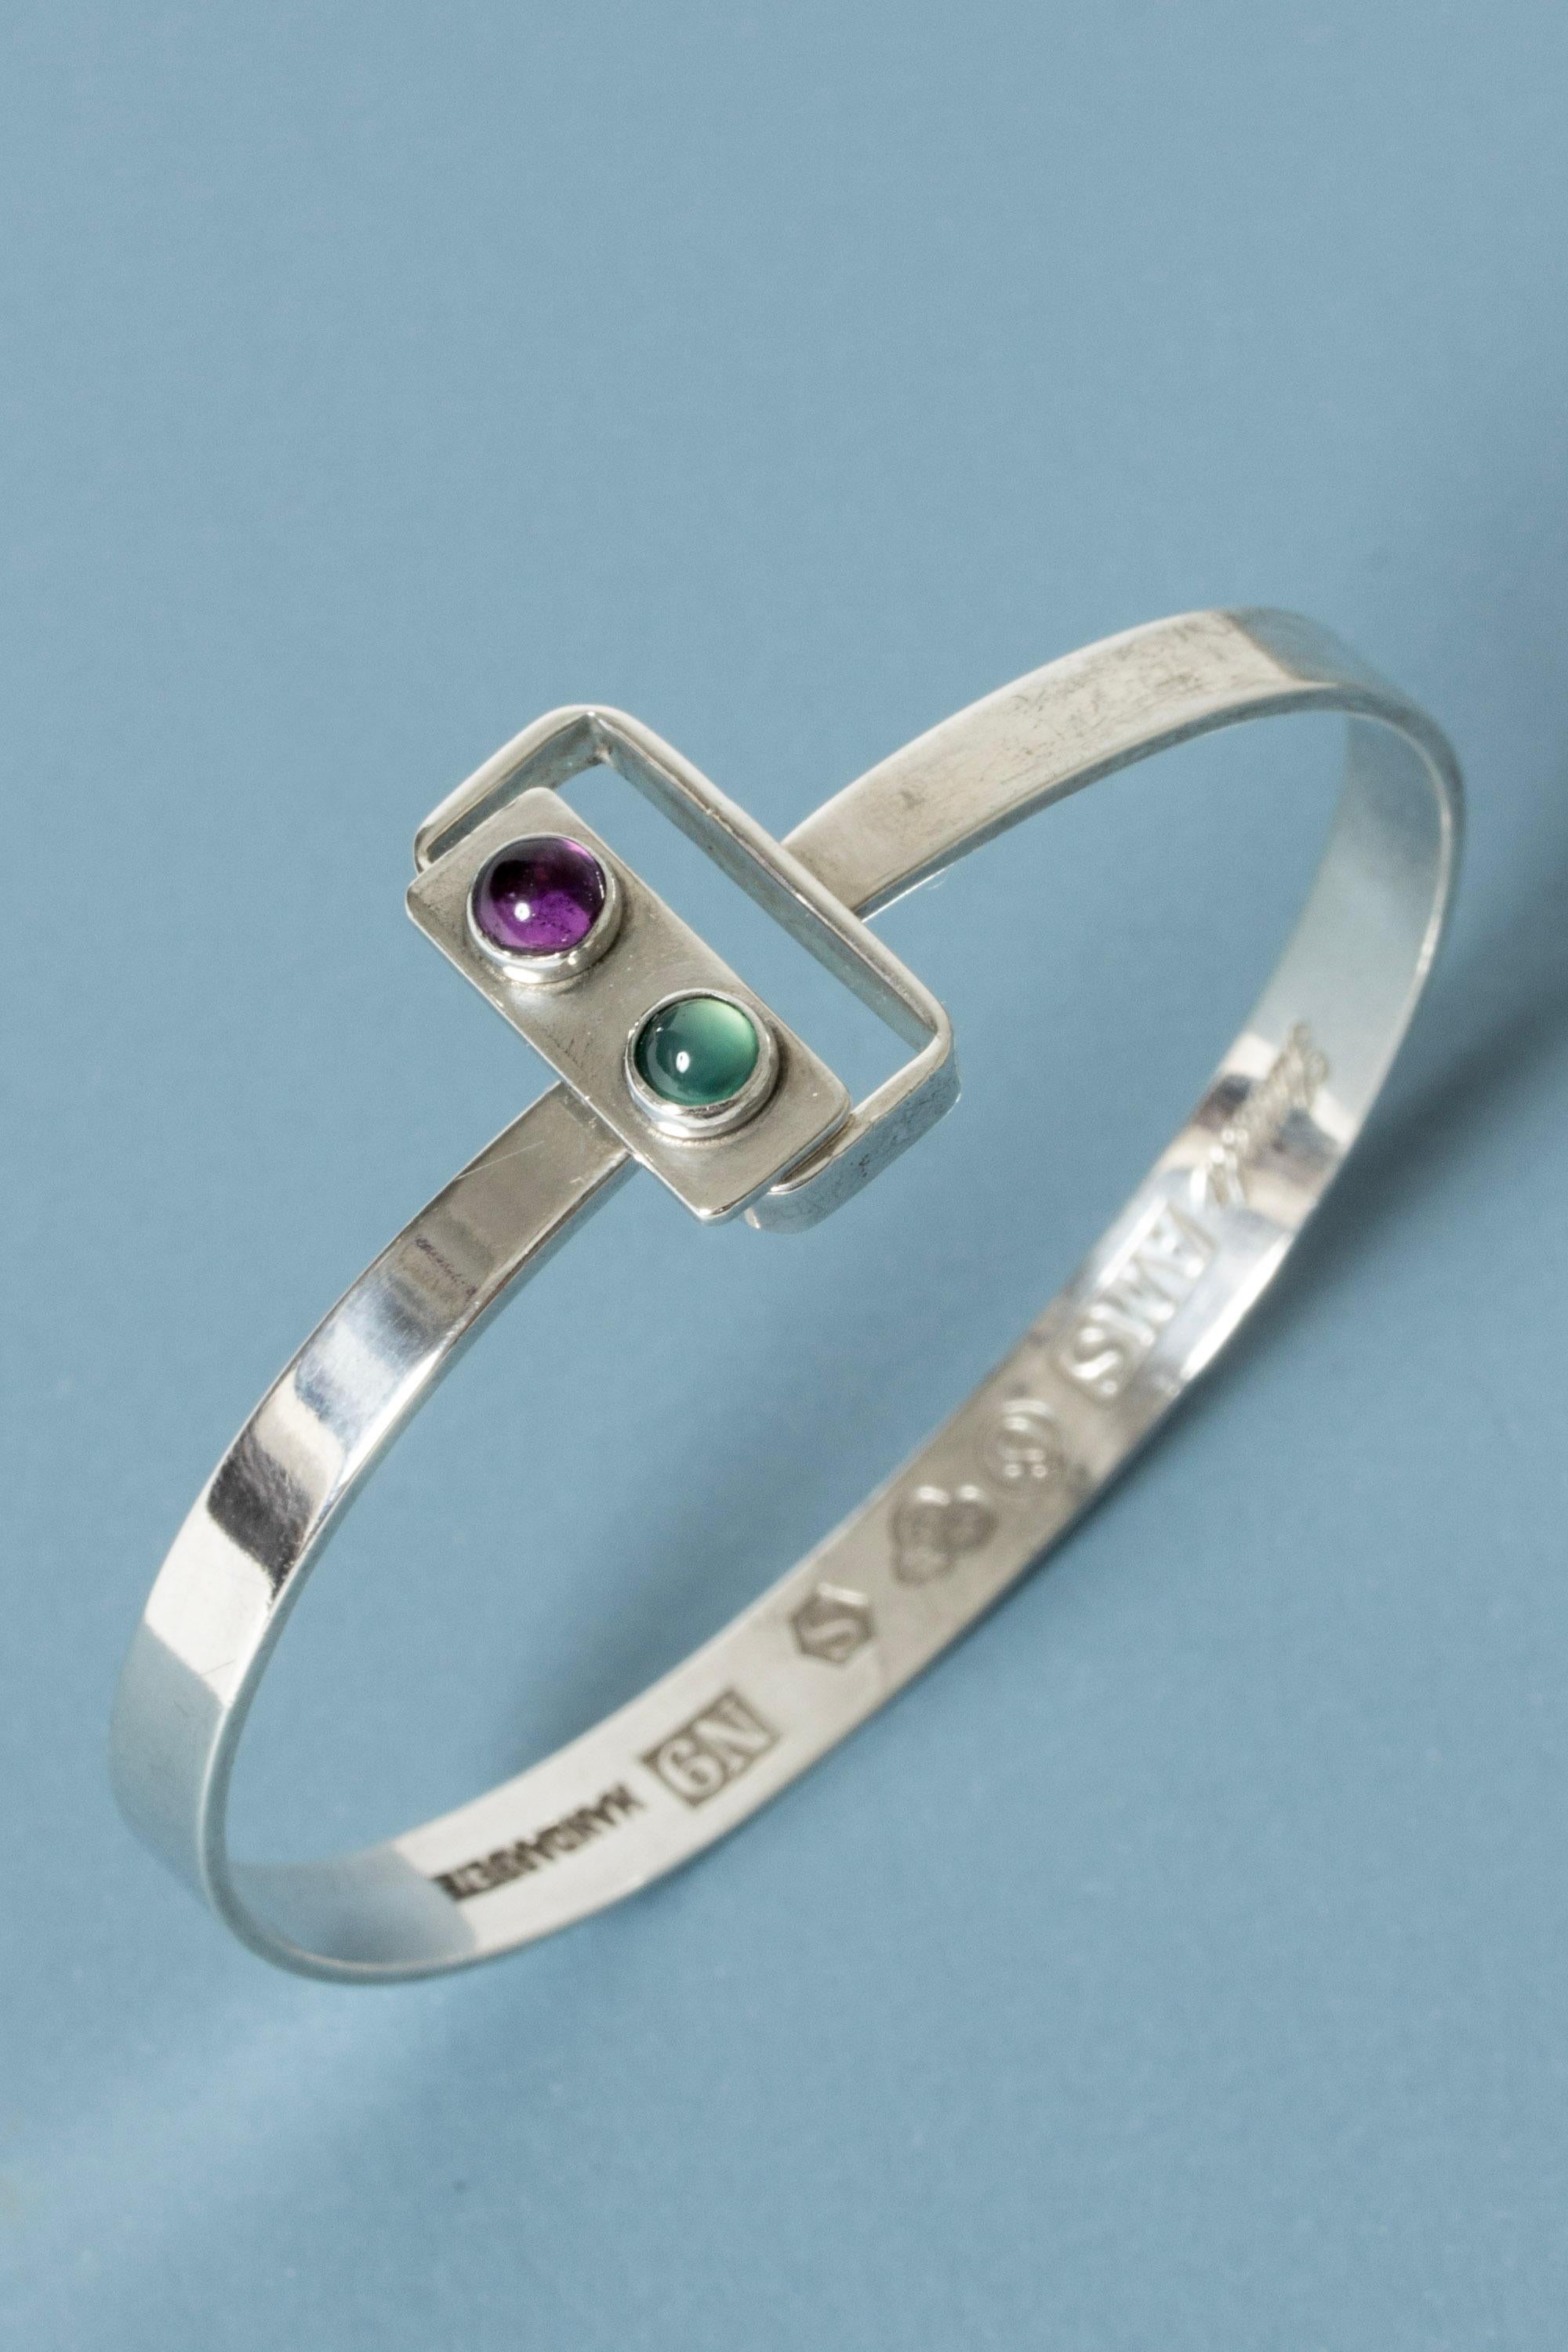 Round Cut Modernist Silver Bracelet with Amethyst and Tourmaline, Sweden, 1968